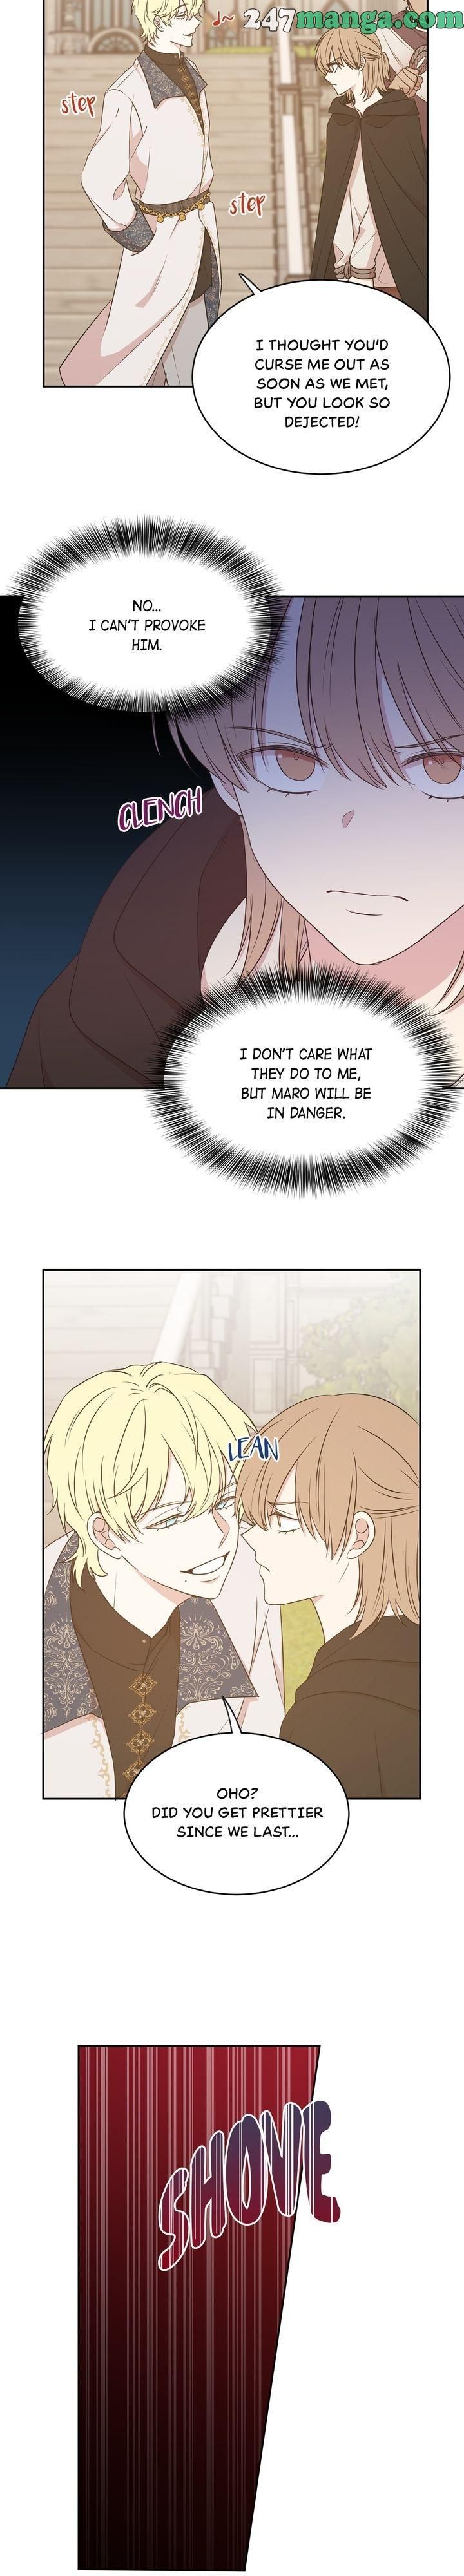 I Choose the Emperor Ending Chapter 95 page 10